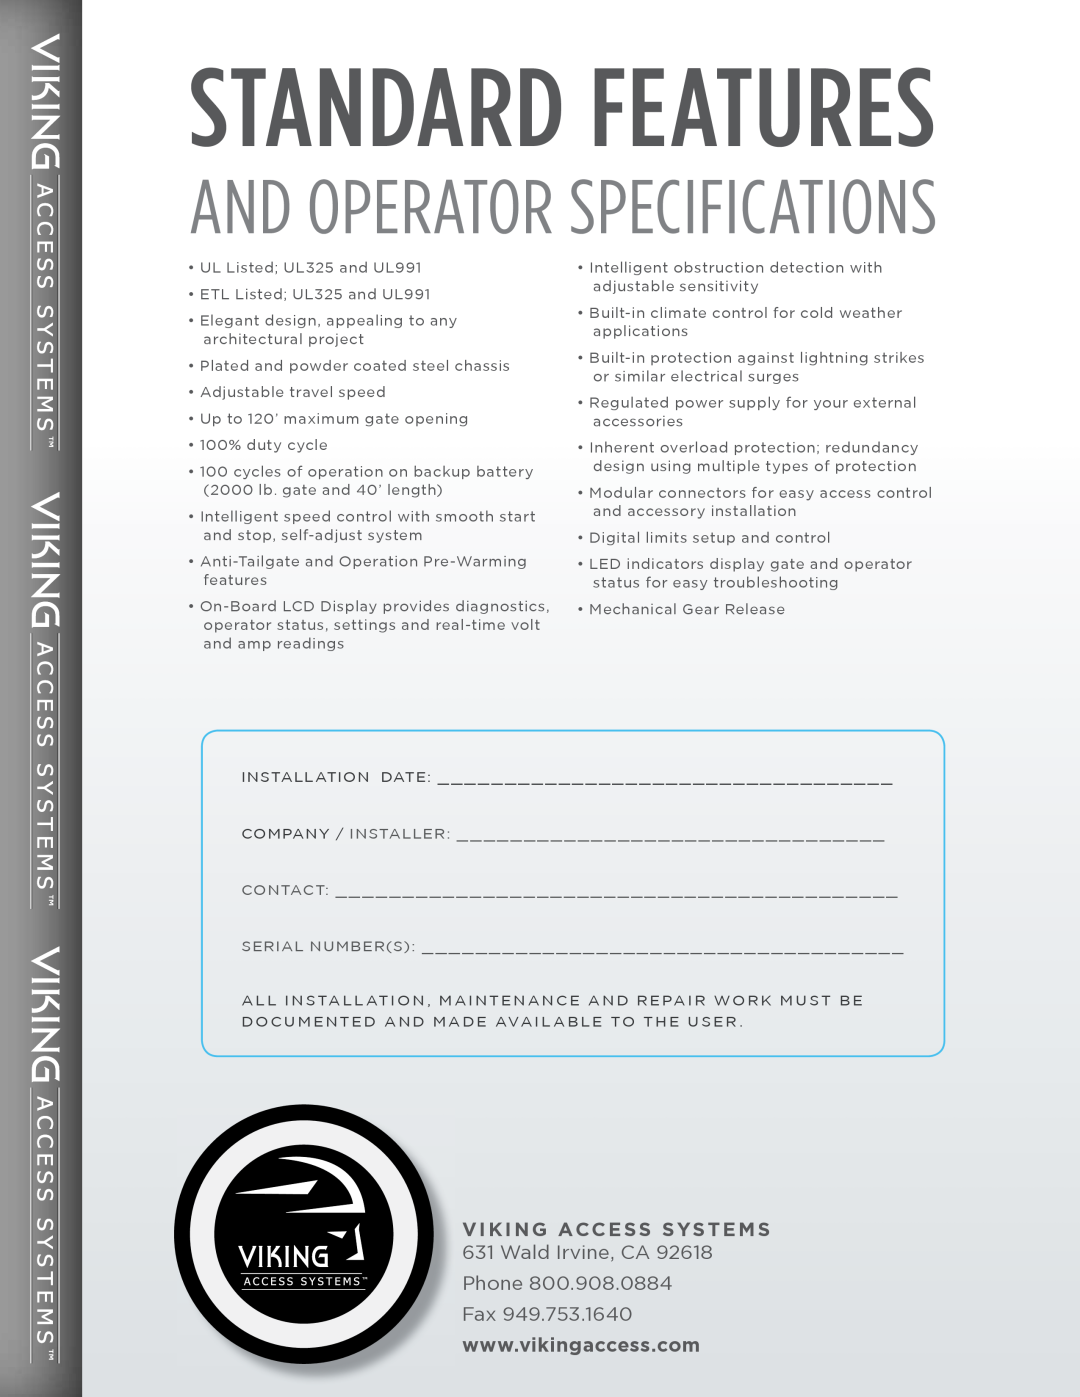 Viking Access Systems Q7 manual Standard Features, And Operator Specifications, Viking Access Systems 